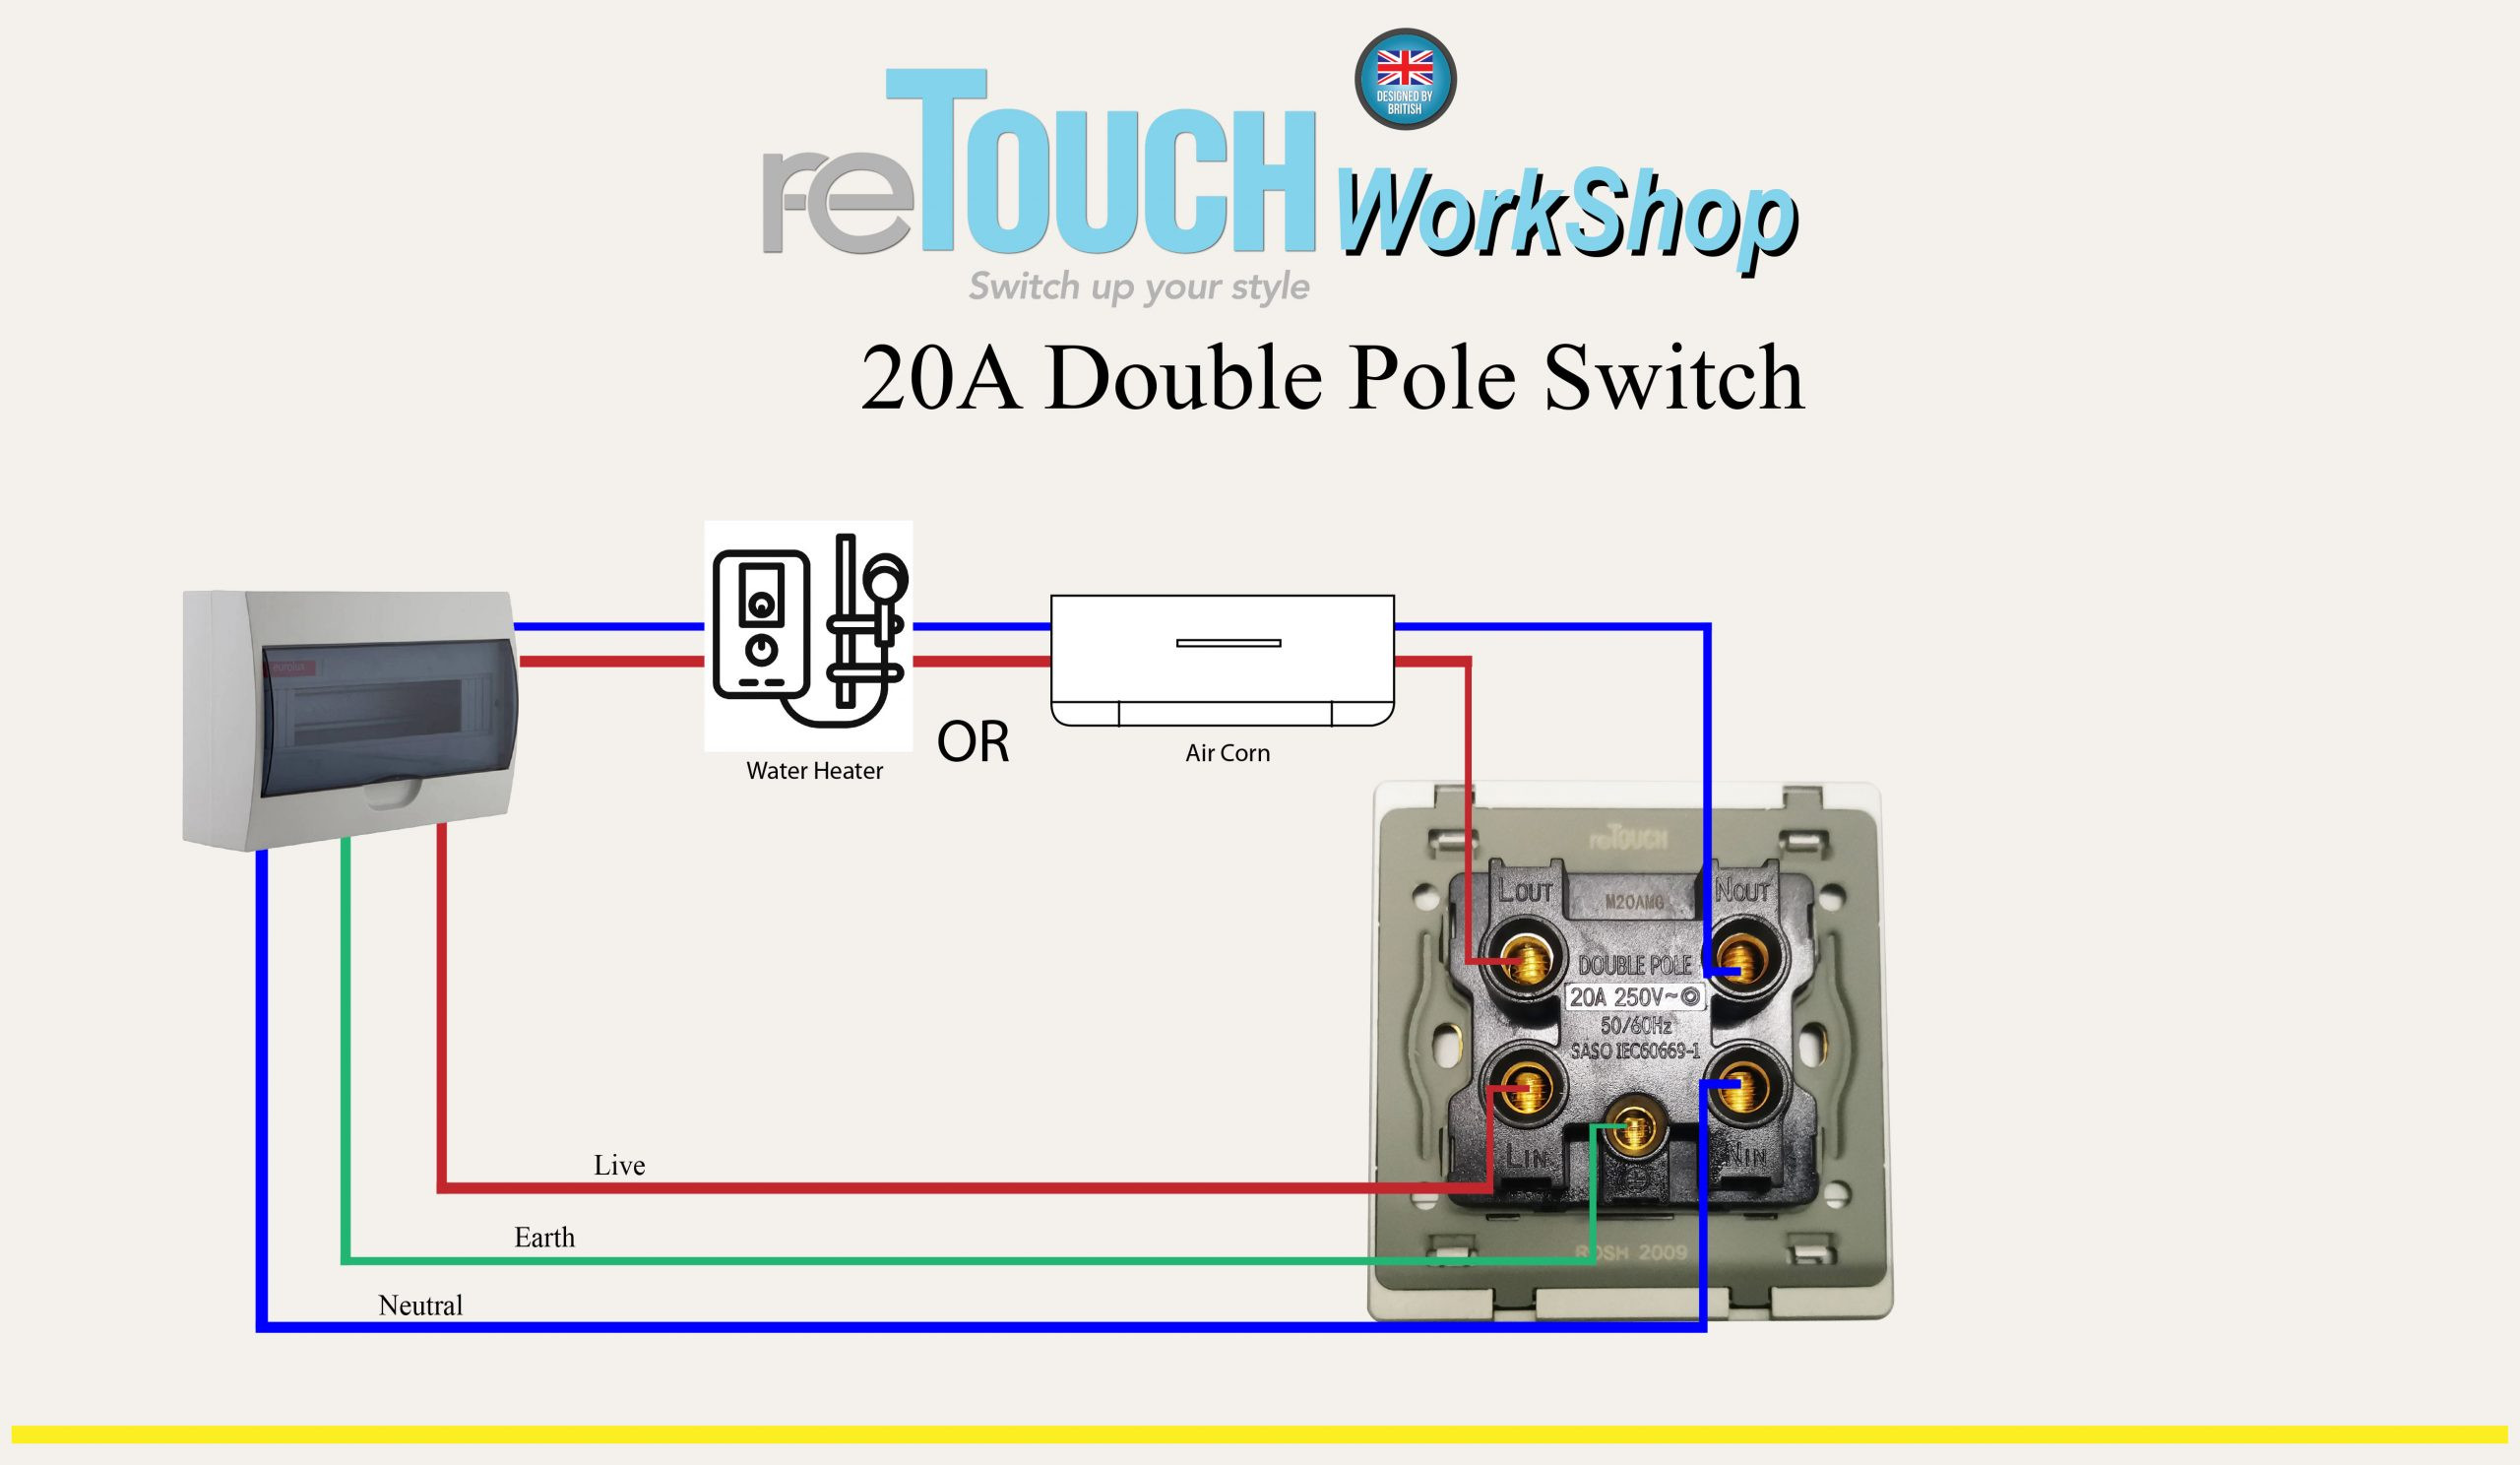 retouch workshop ep4 how to install retouch switches 2